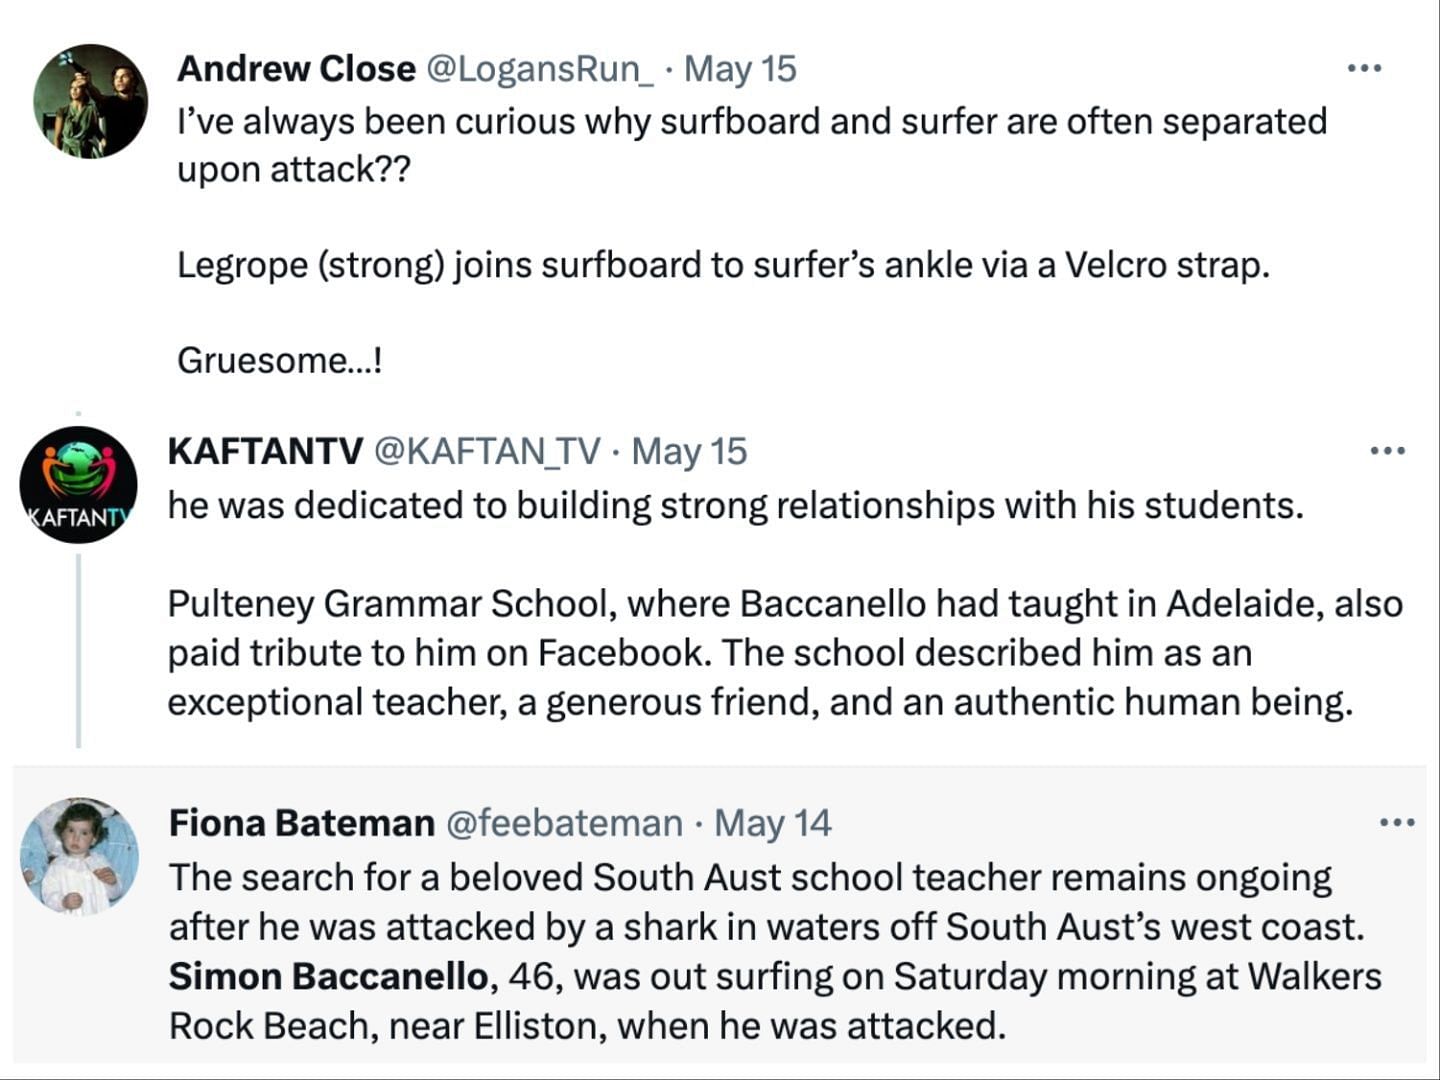 Social media users share tributes as Simon, a school teacher, goes missing after a disturbing shark attack last week: Reactions explored. (image via Twitter)